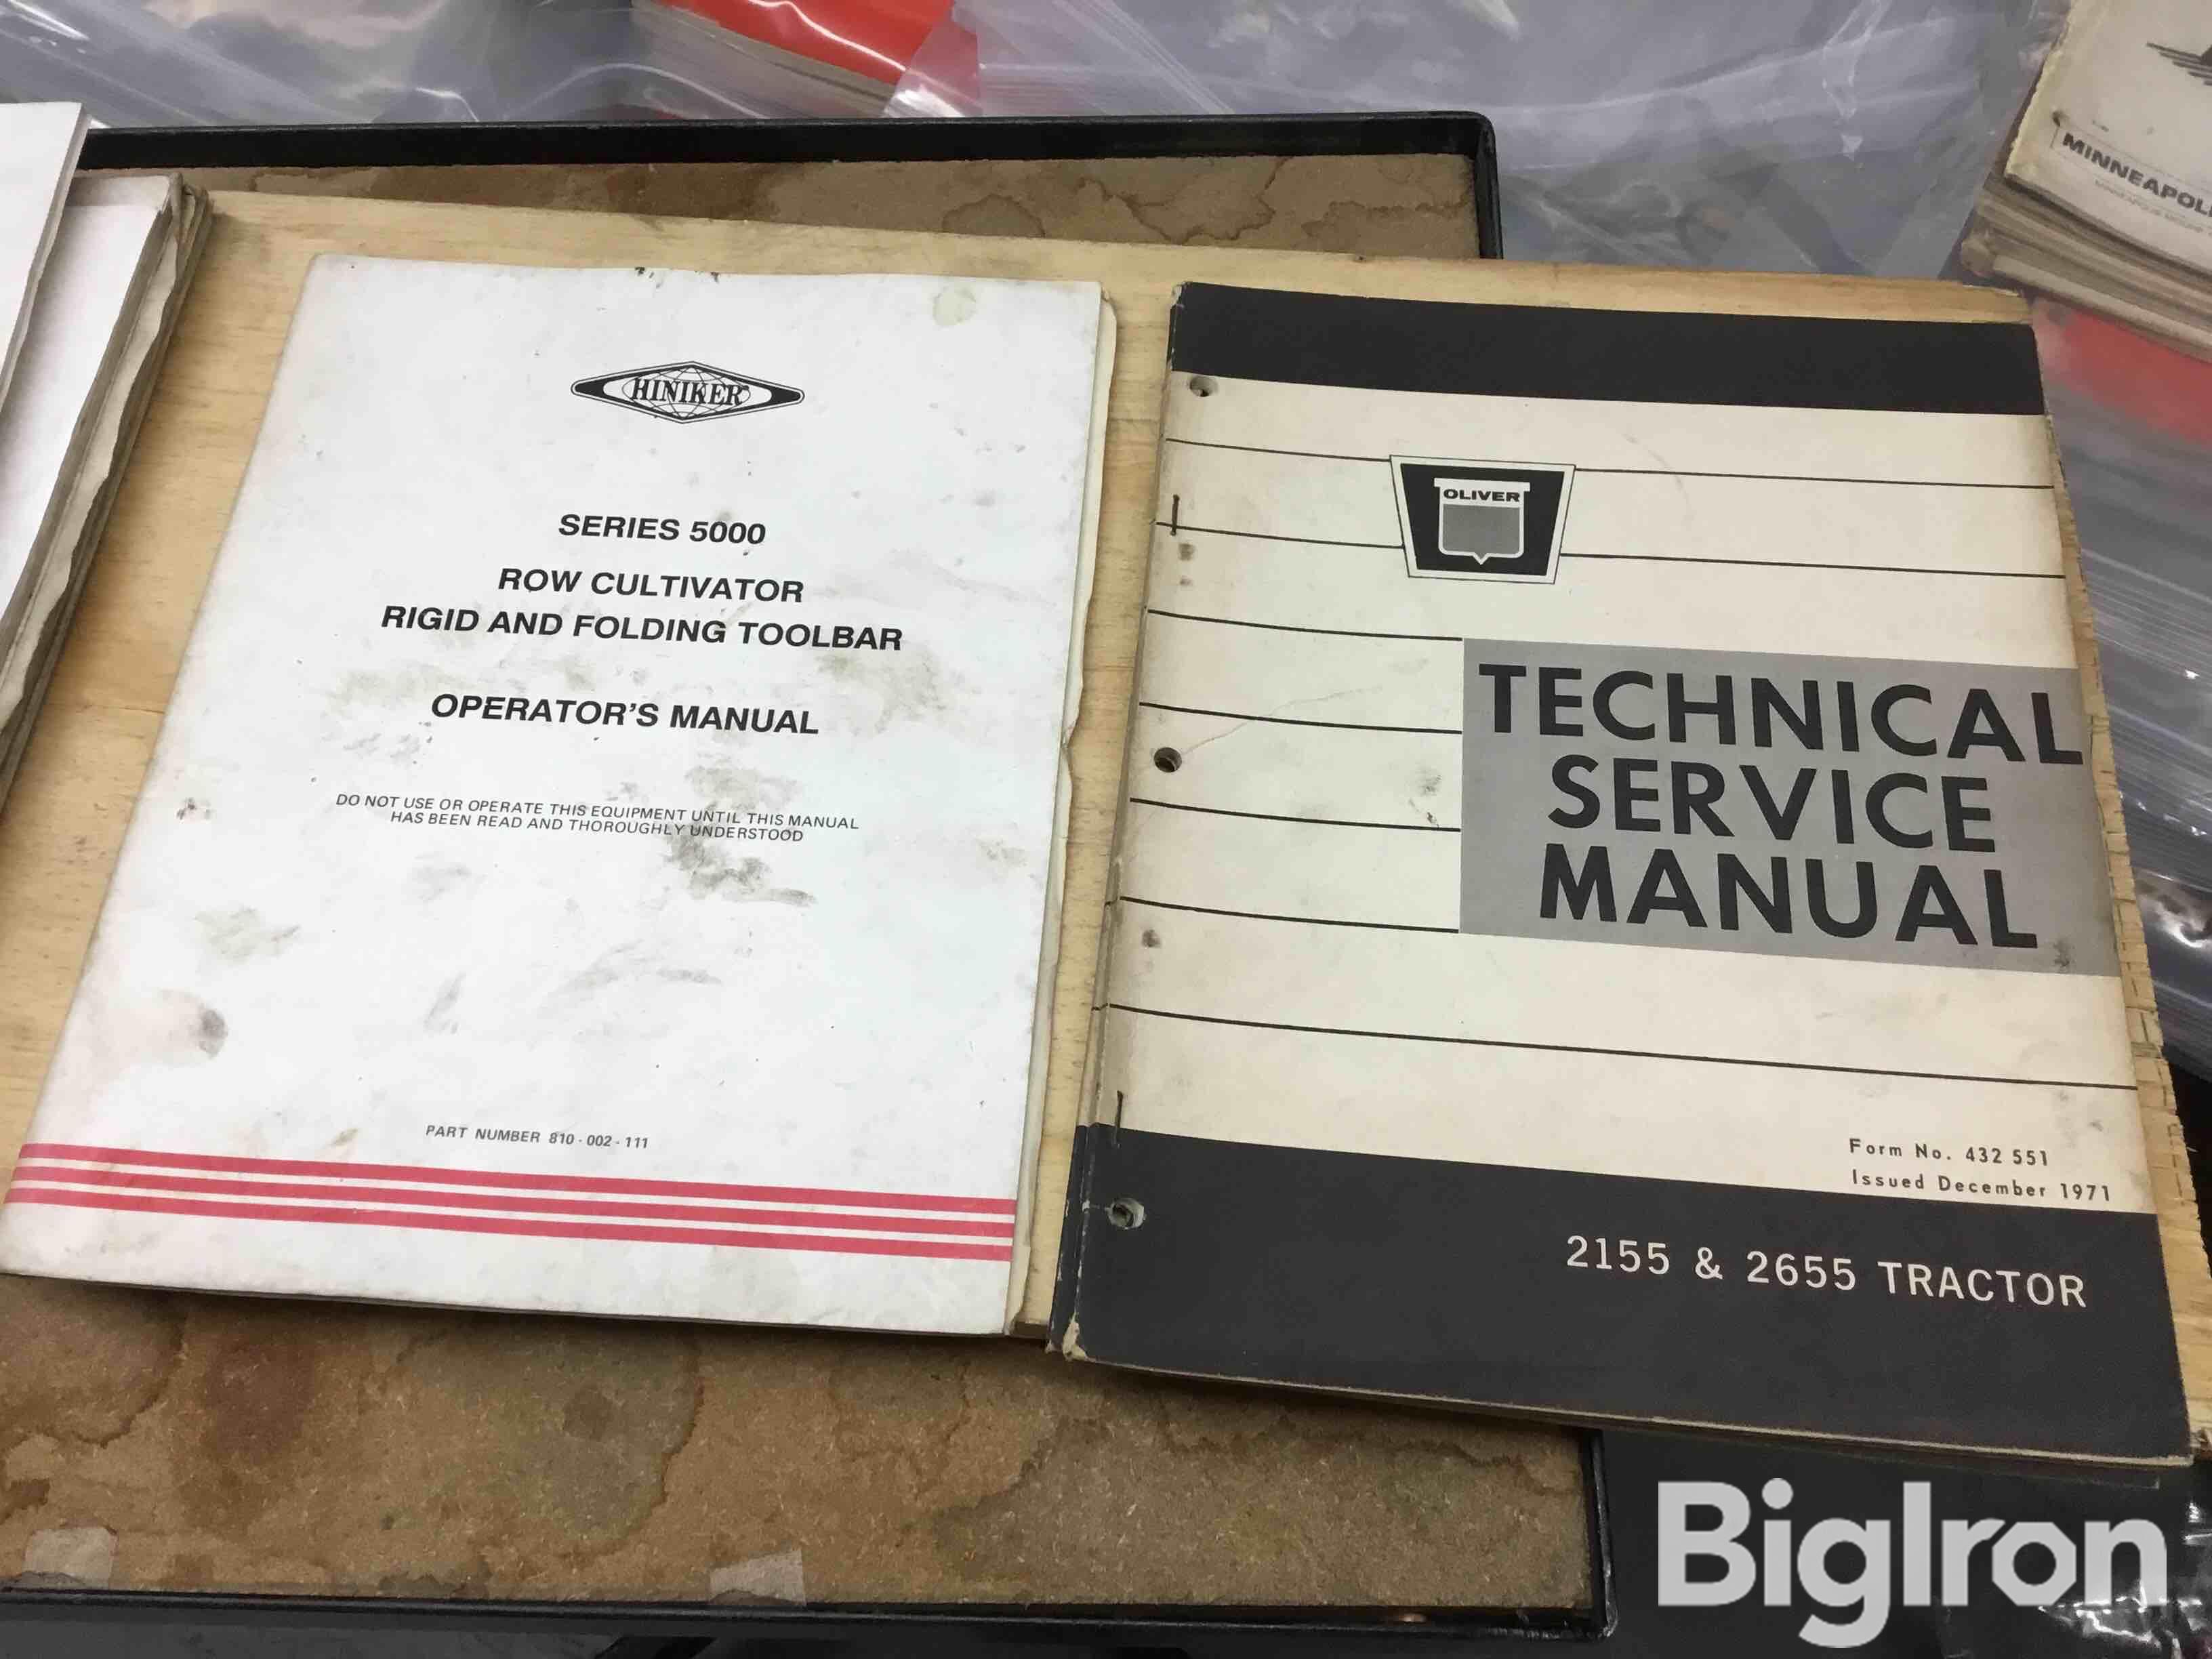 Oliver 2155-2655, Hiniker 5000 Cultivator Owner's Manuals BigIron Auctions